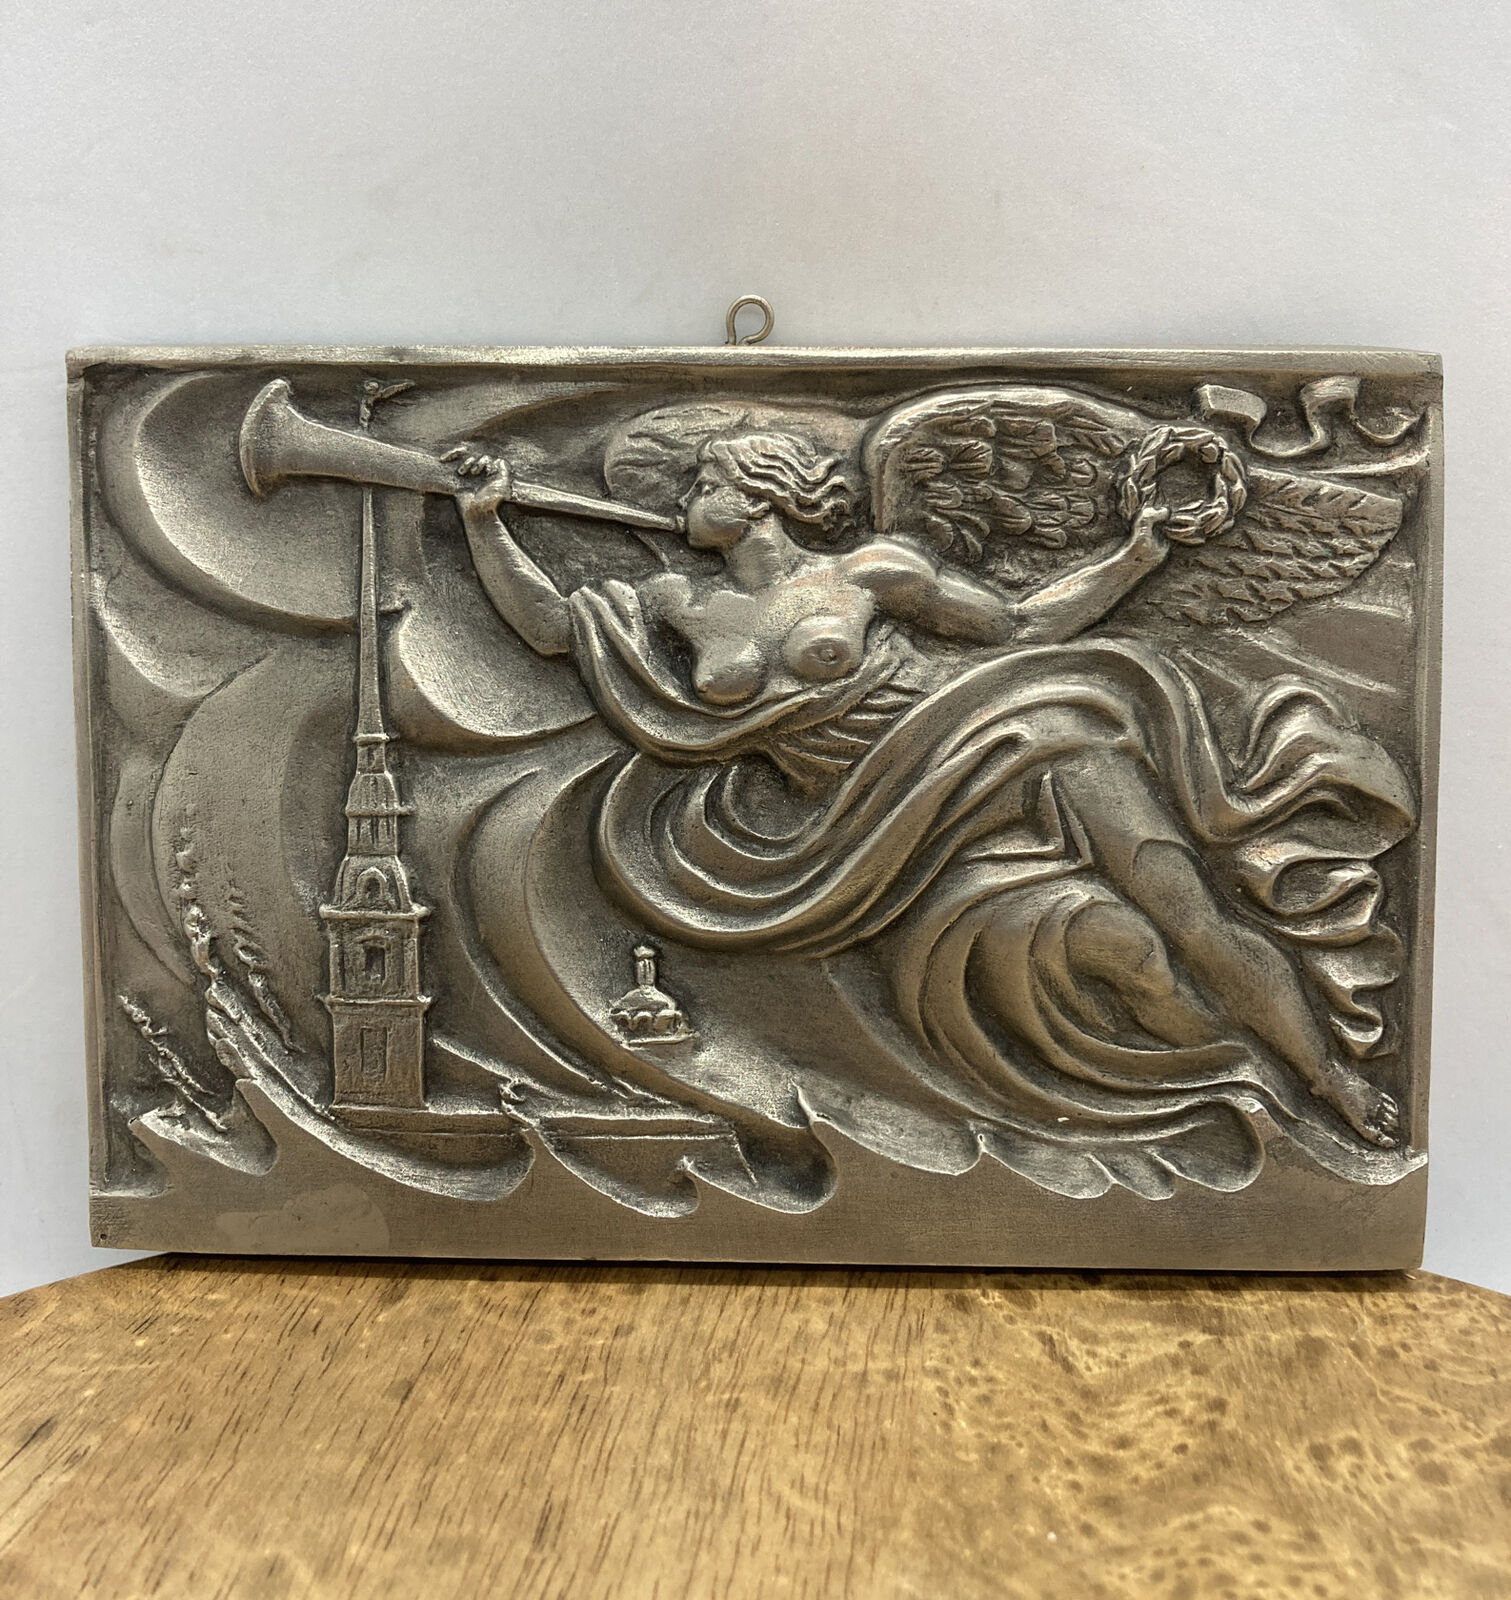 Russian metal wall hanging plaque Angel Over cityscape St. Petersburg 7.25”x5”